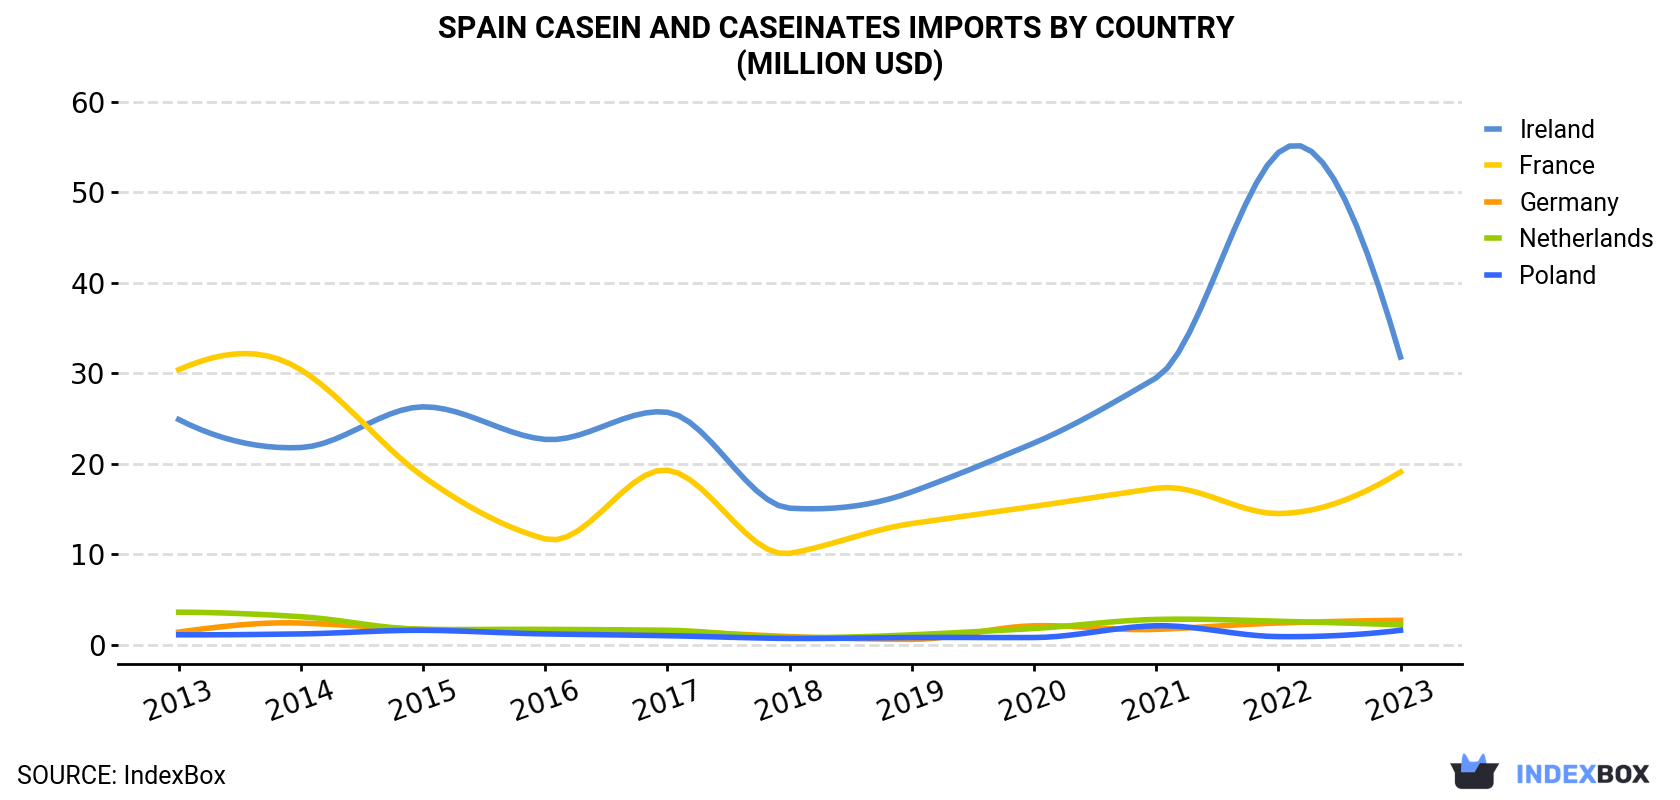 Spain Casein And Caseinates Imports By Country (Million USD)